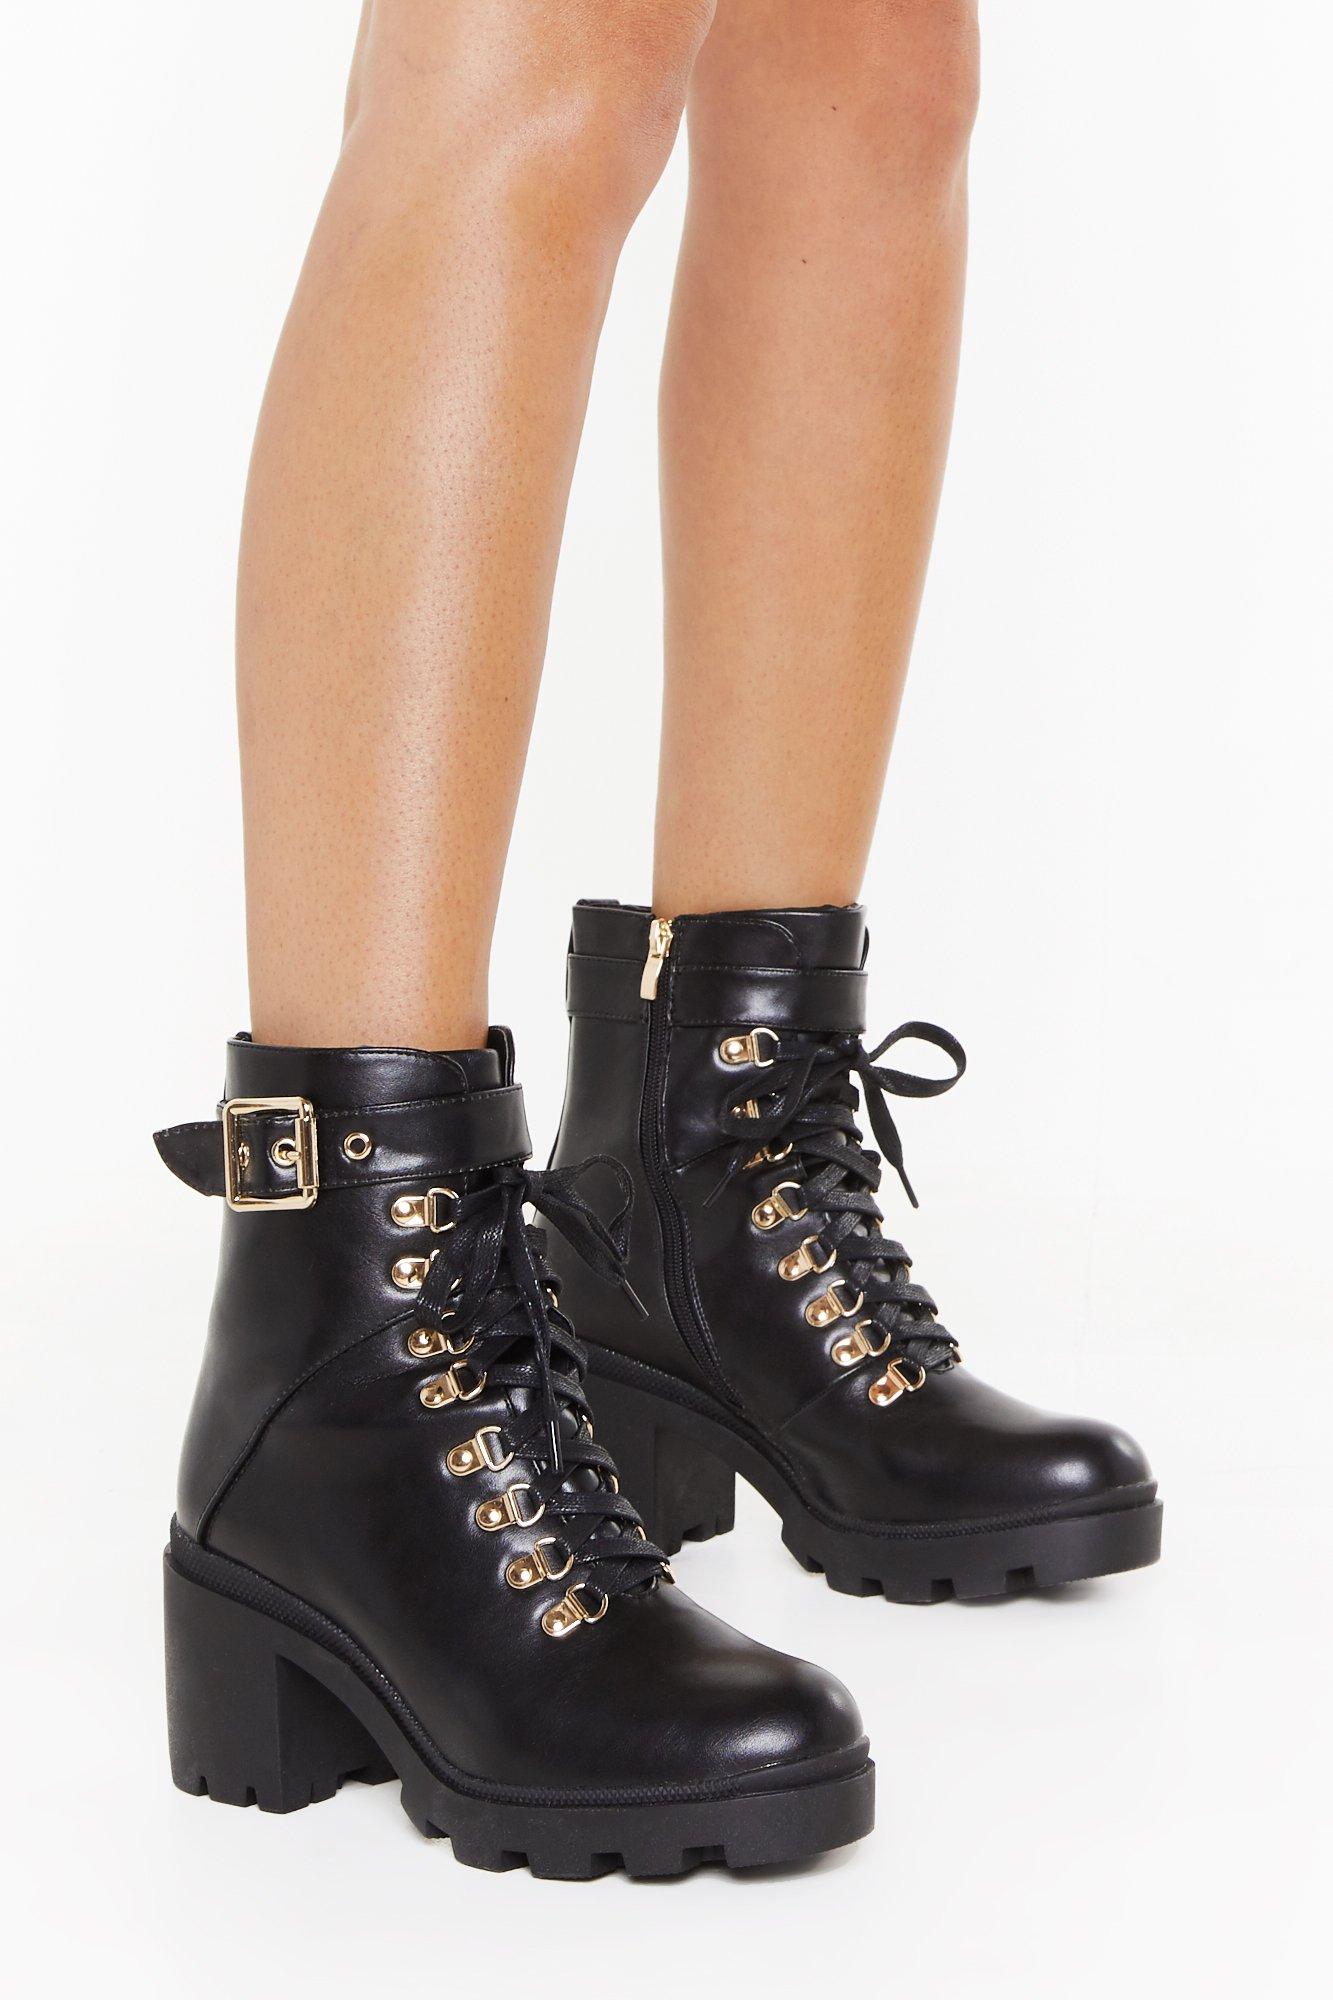 lace up black booties with heel